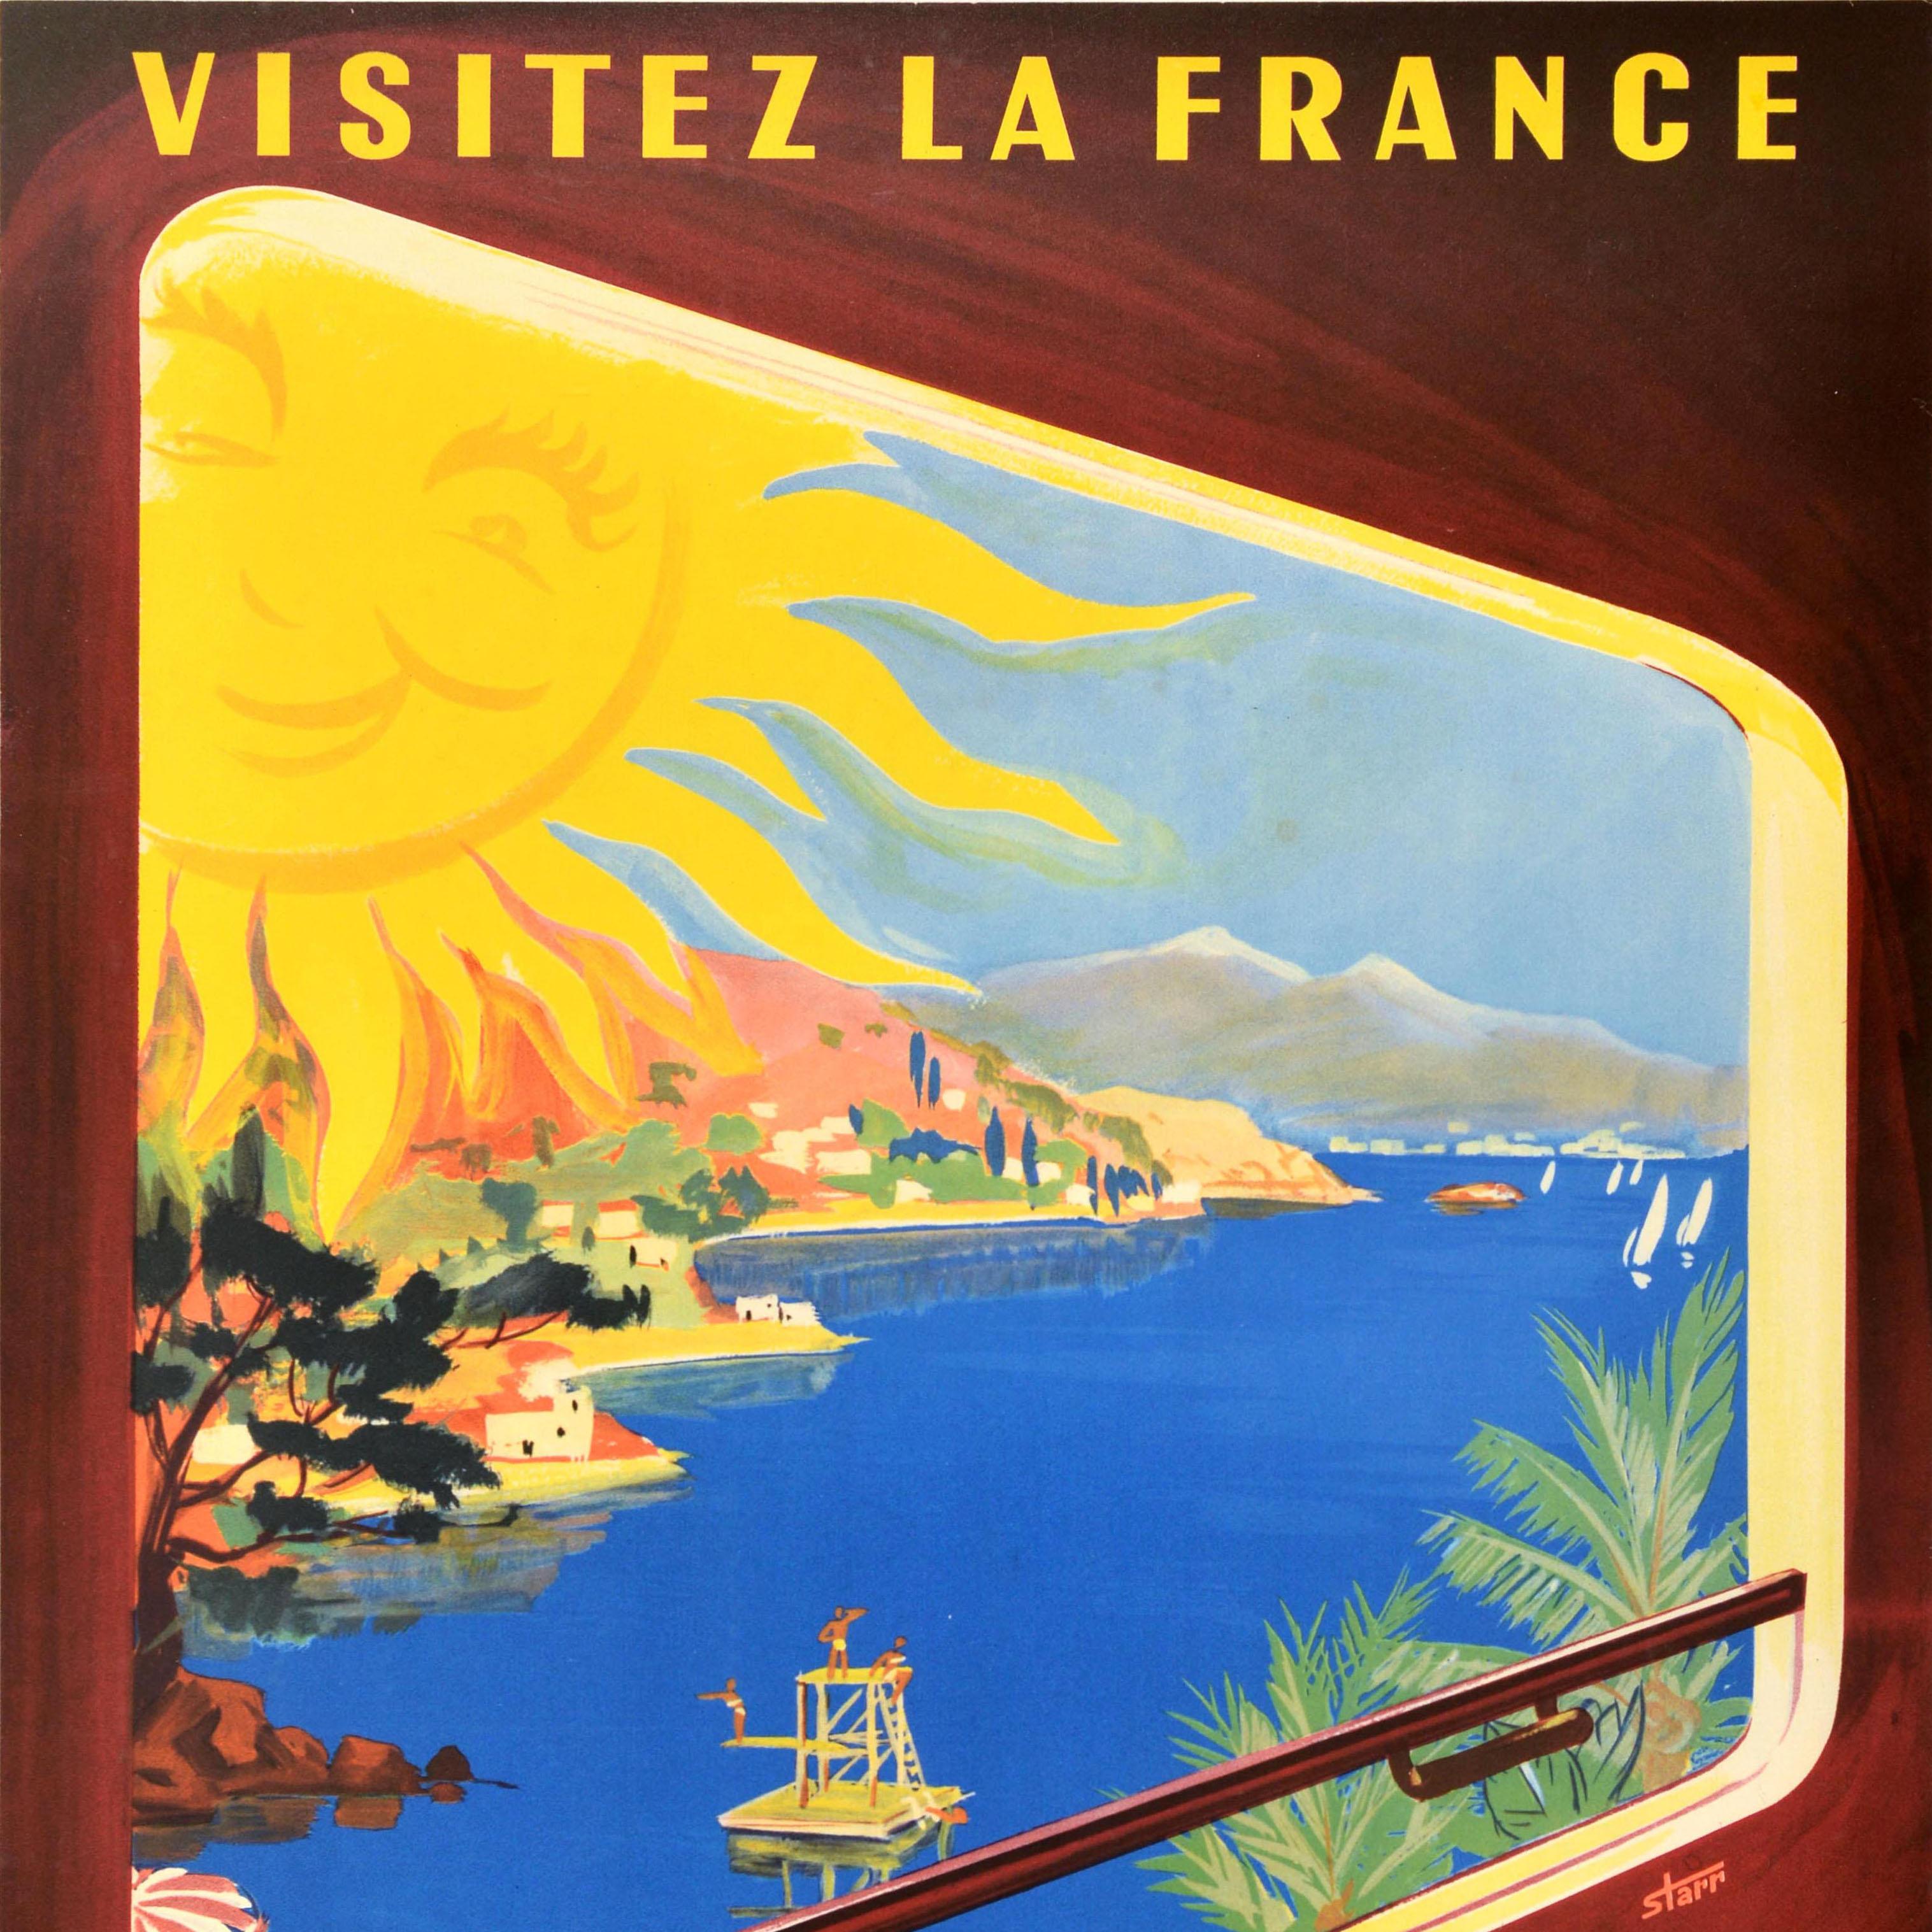 Original Vintage Travel Poster French Riviera Cote D'Azur SNCF Visit France - Brown Print by Unknown